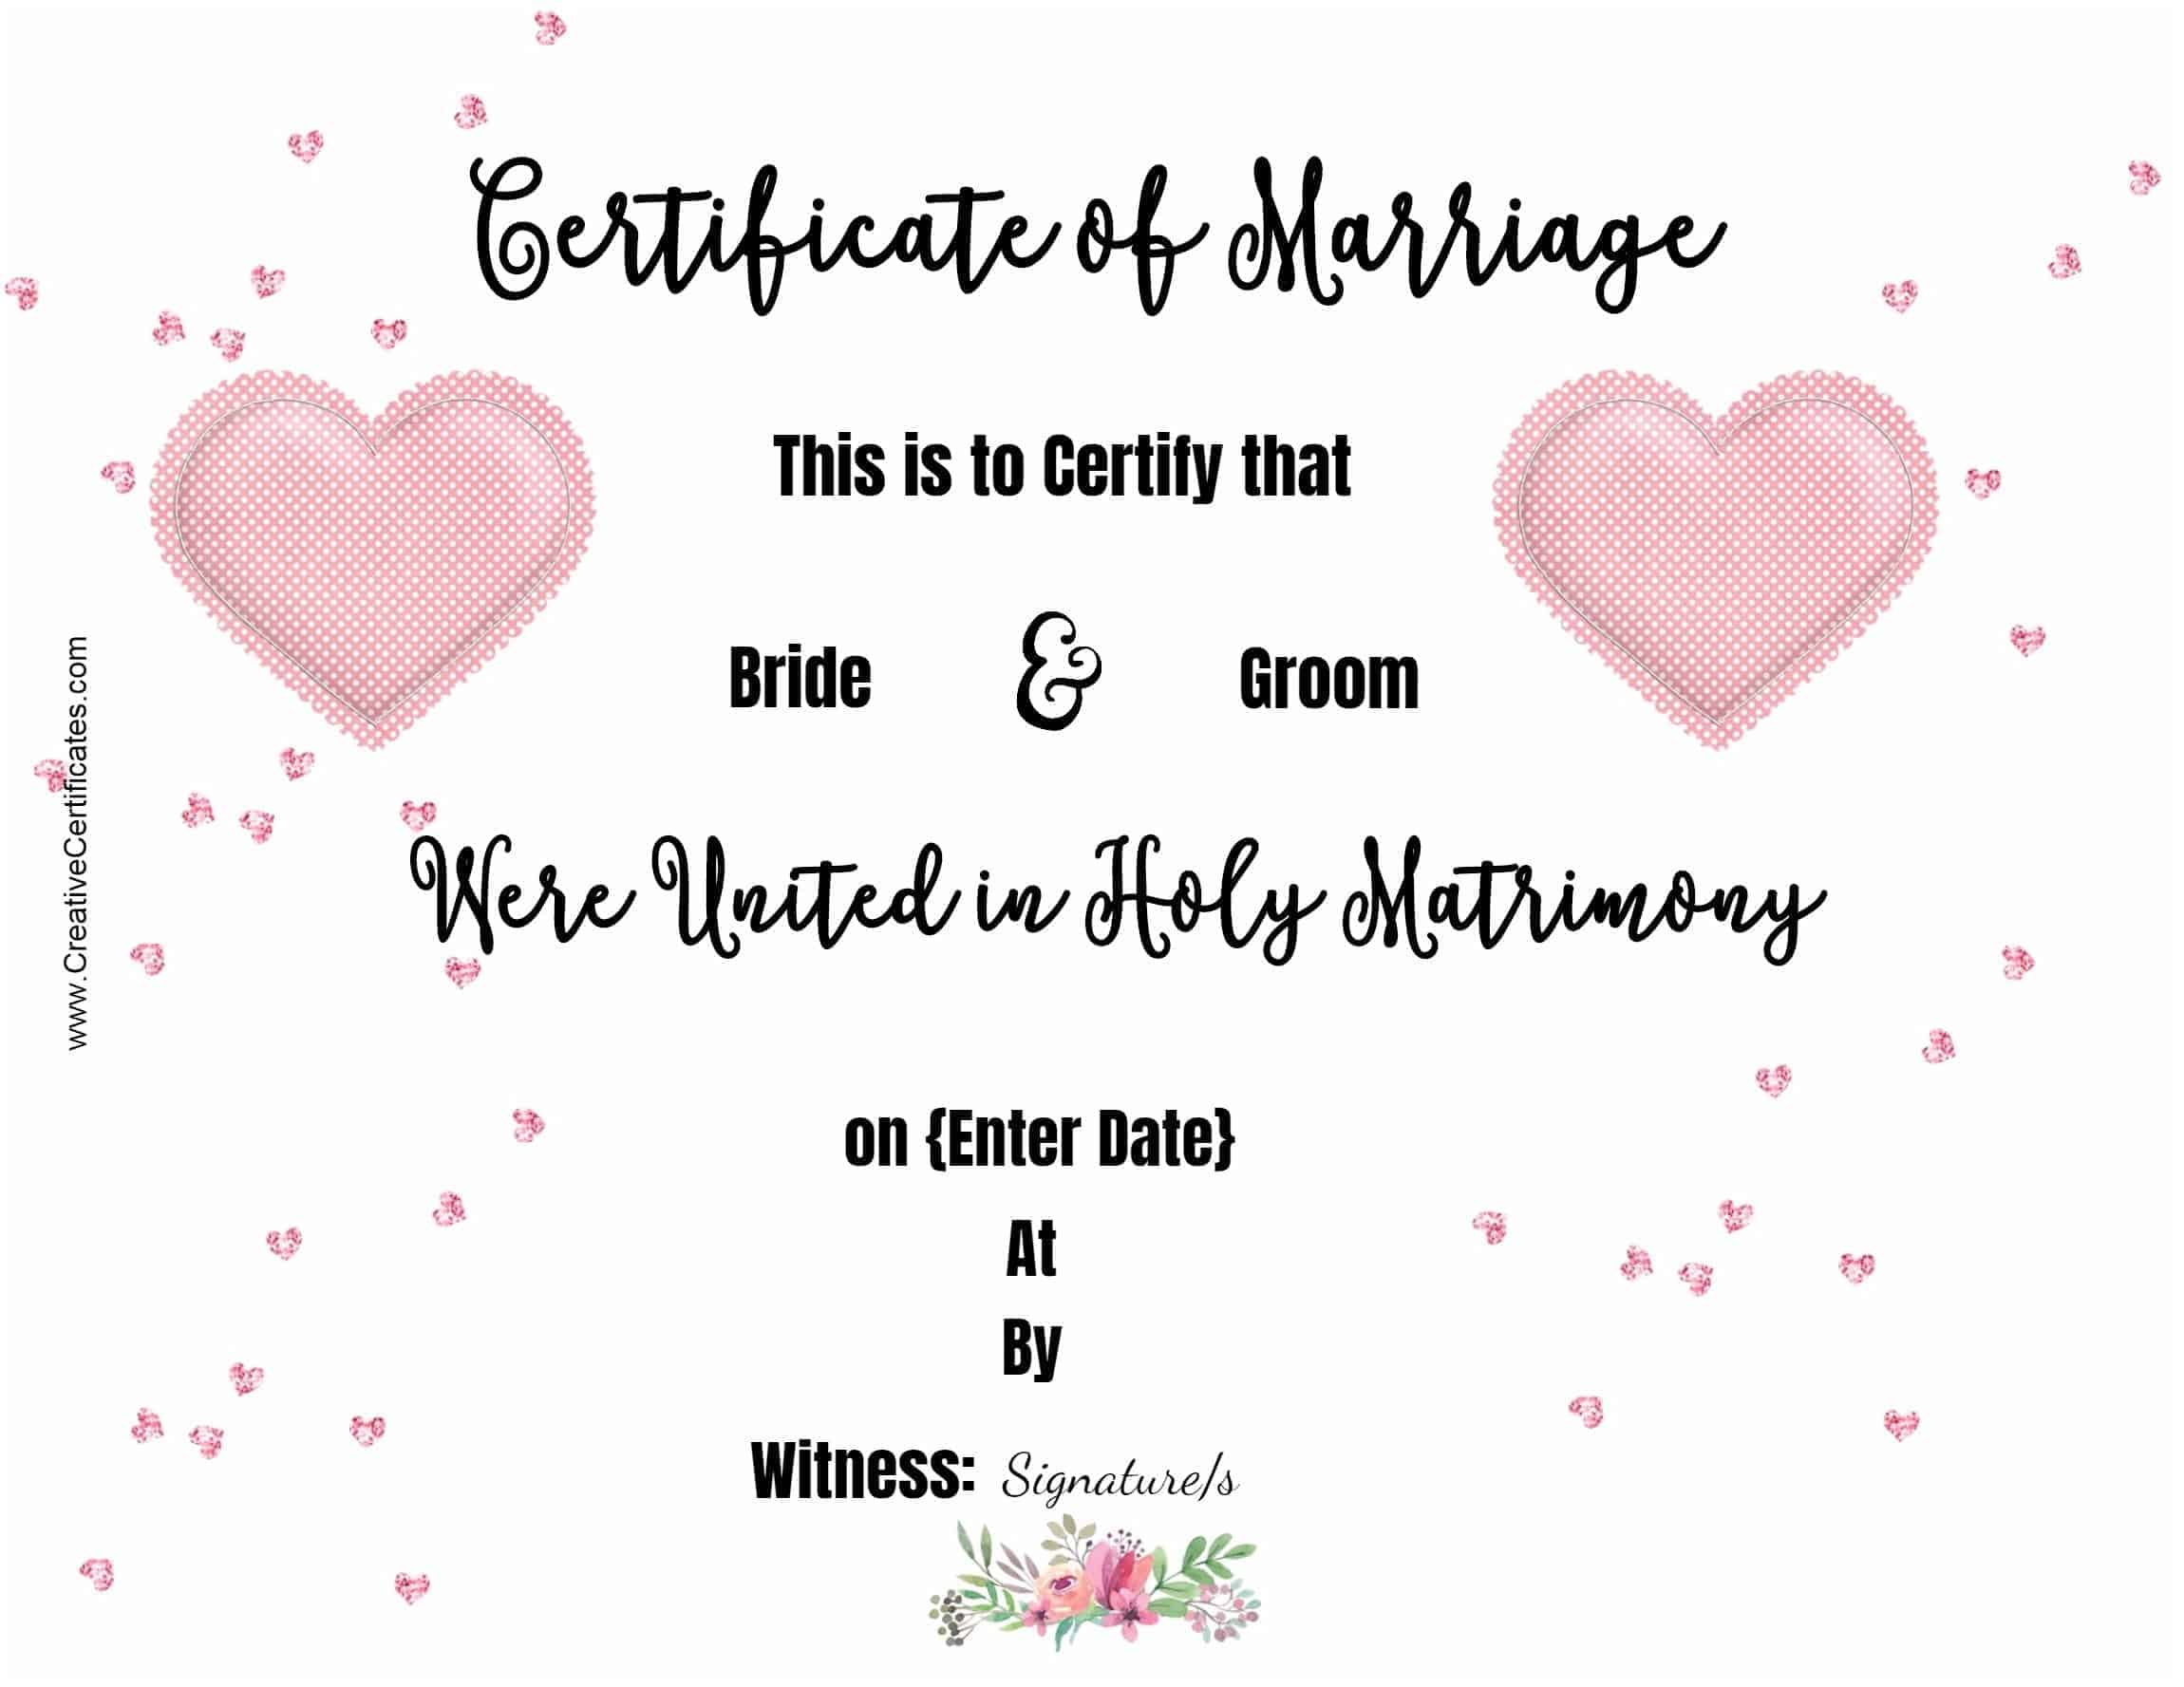 Free Marriage Certificate Template | Customize Online then Print